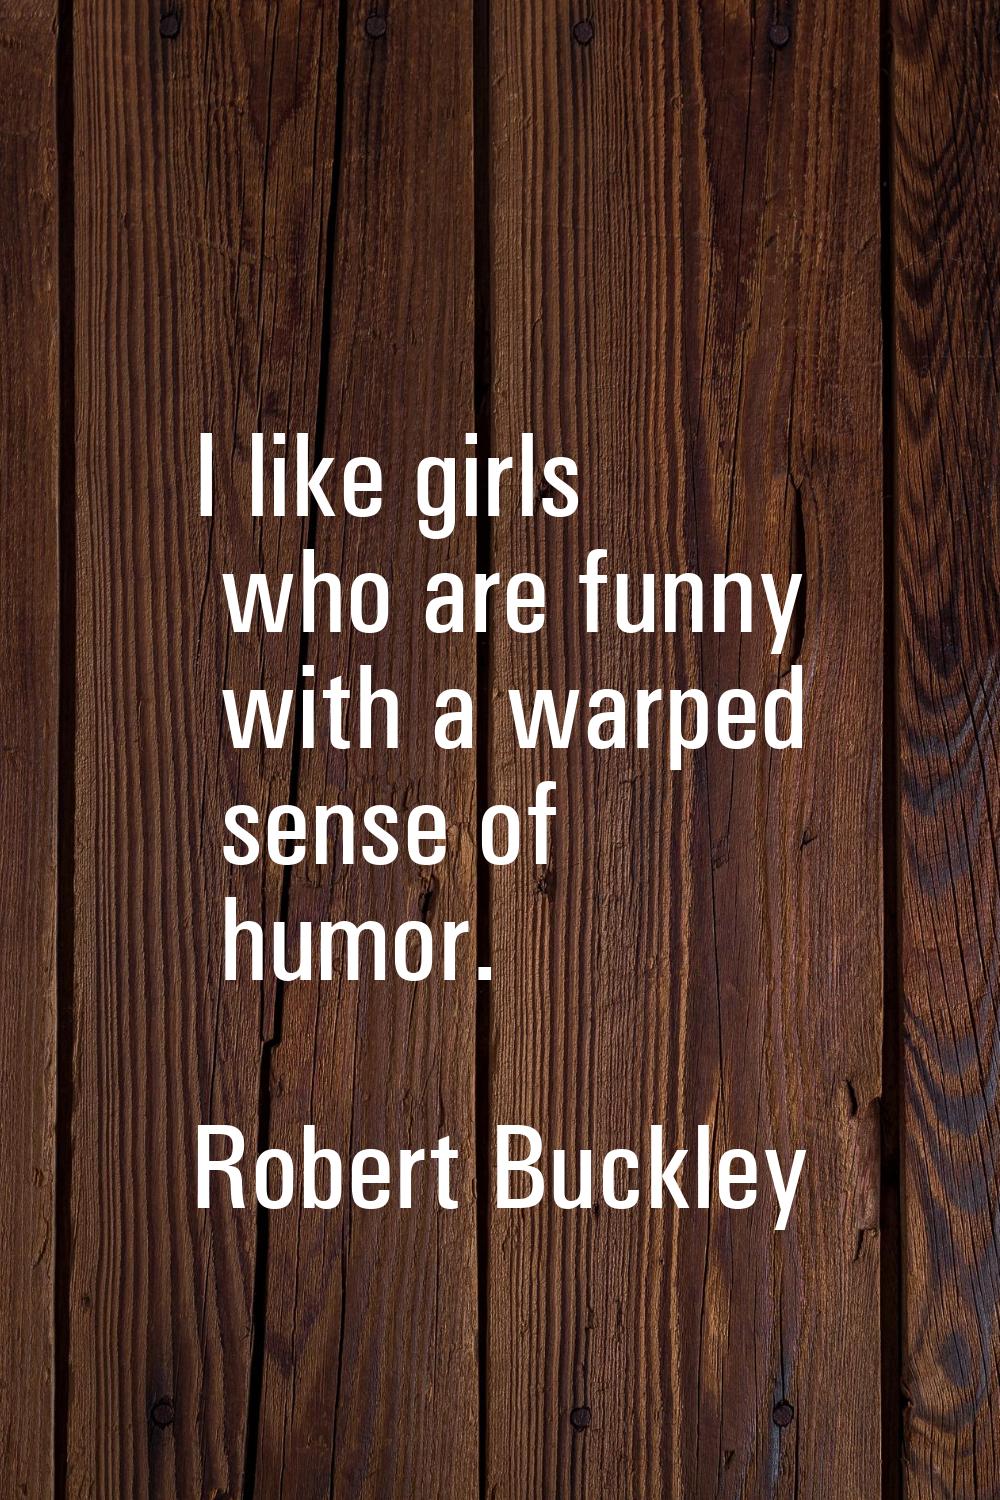 I like girls who are funny with a warped sense of humor.